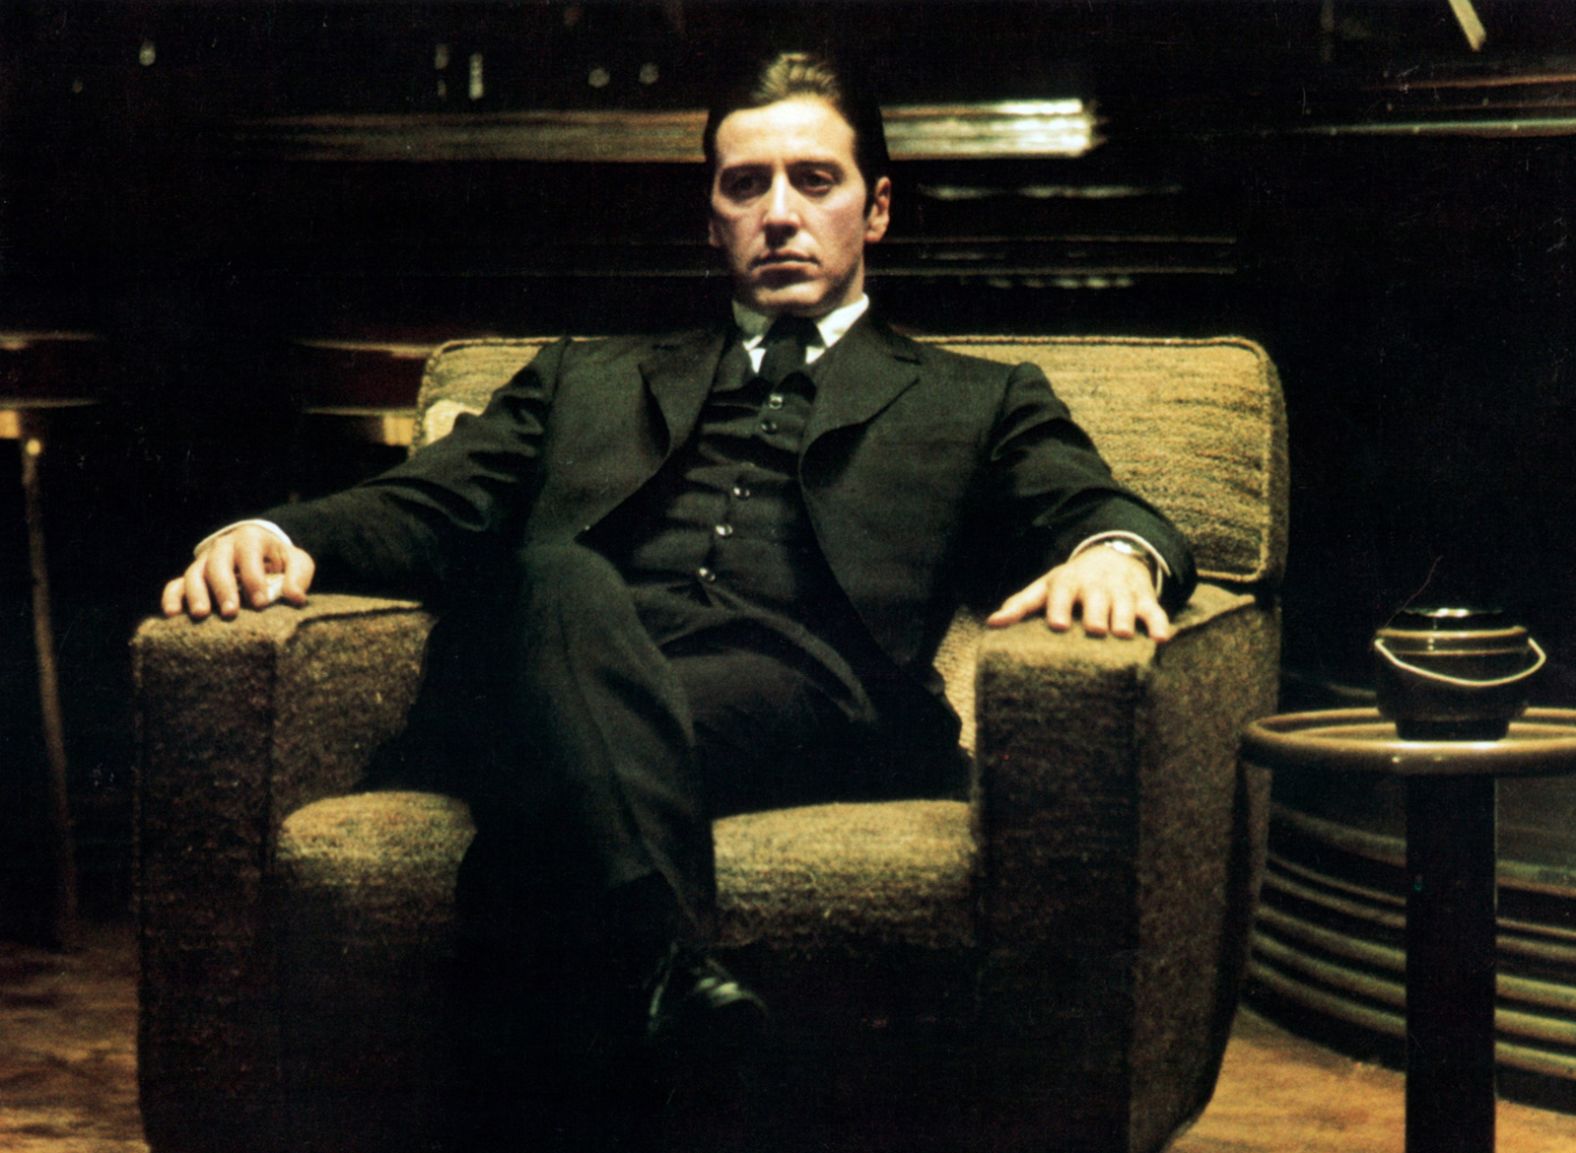 <strong>"The Godfather: Part II" (1975):</strong> Al Pacino returned as Michael Corleone in "The Godfather: Part II," which became the first sequel to win the best picture Oscar. Francis Ford Coppola received the best director award this time, and newcomer Robert De Niro won the best supporting actor Oscar playing Vito Corleone as a young man. Coppola's "The Godfather: Part III," released in 1990, did not repeat the success of the first two films.